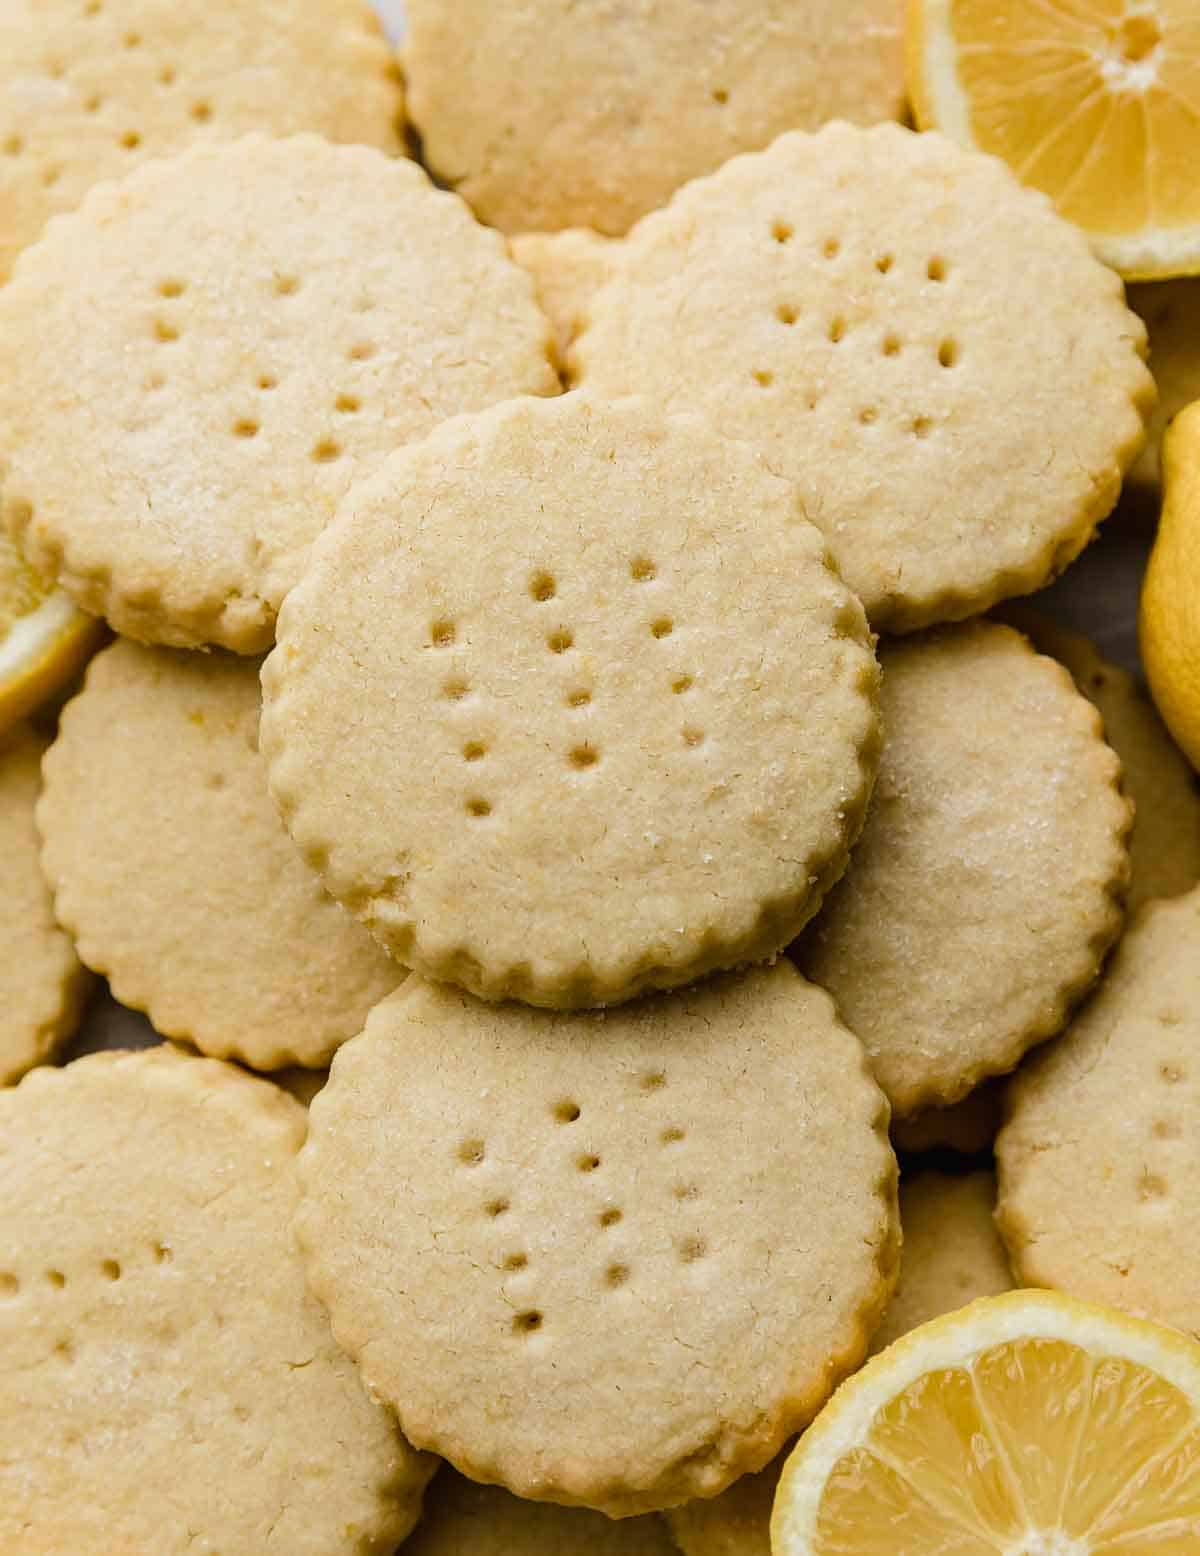 Round Lemon Shortbread Cookies with fork tine piercings on the tops of each cookie.